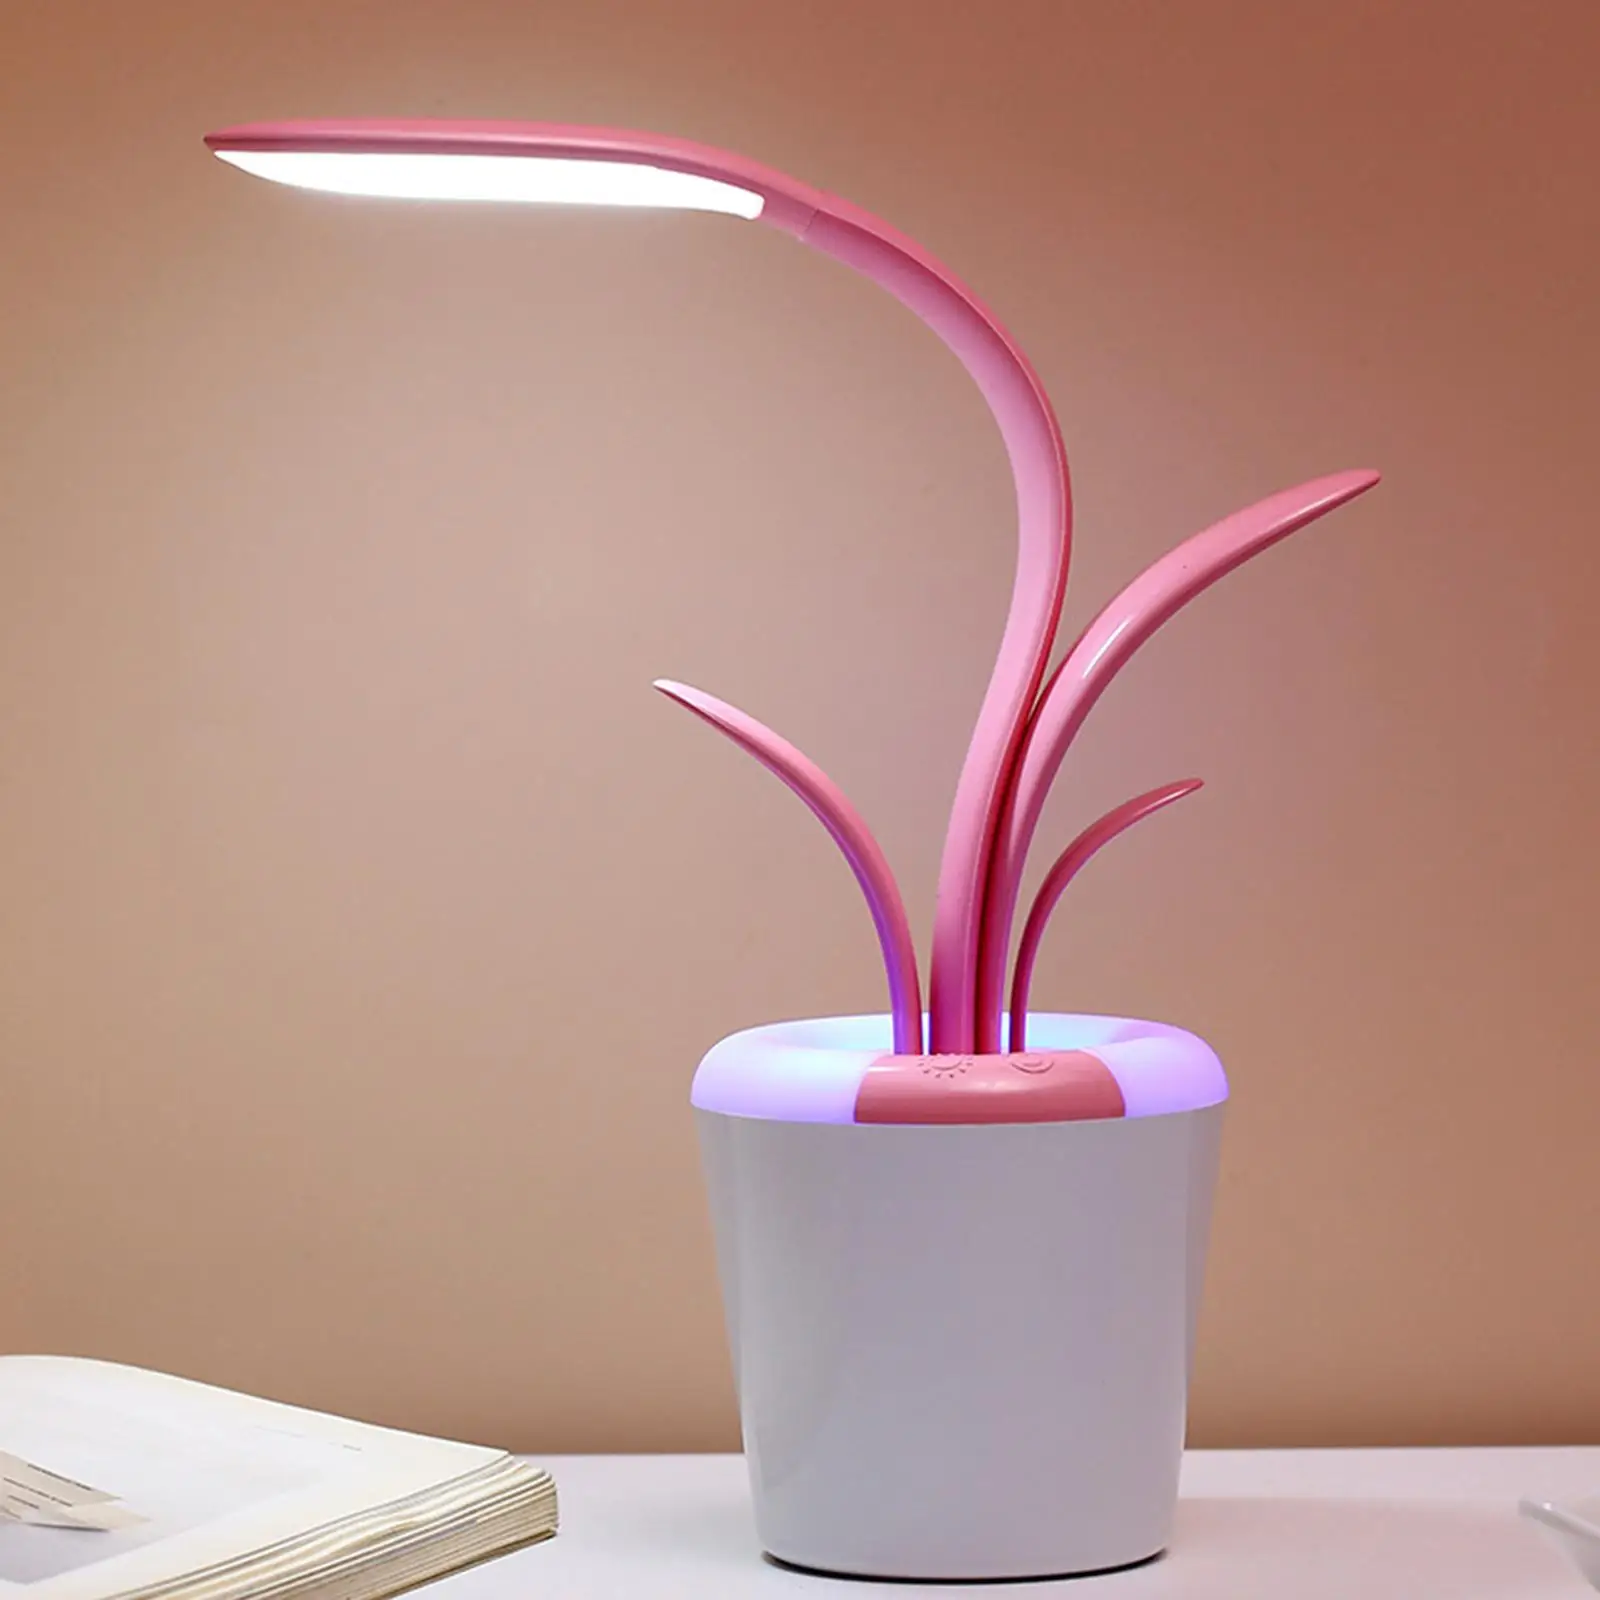 Clivia Shape LED Desk Lamp Nightstand Eye-Caring Rechargeable Table Light Decor Nightlight for Home Office Bedroom Dormitory